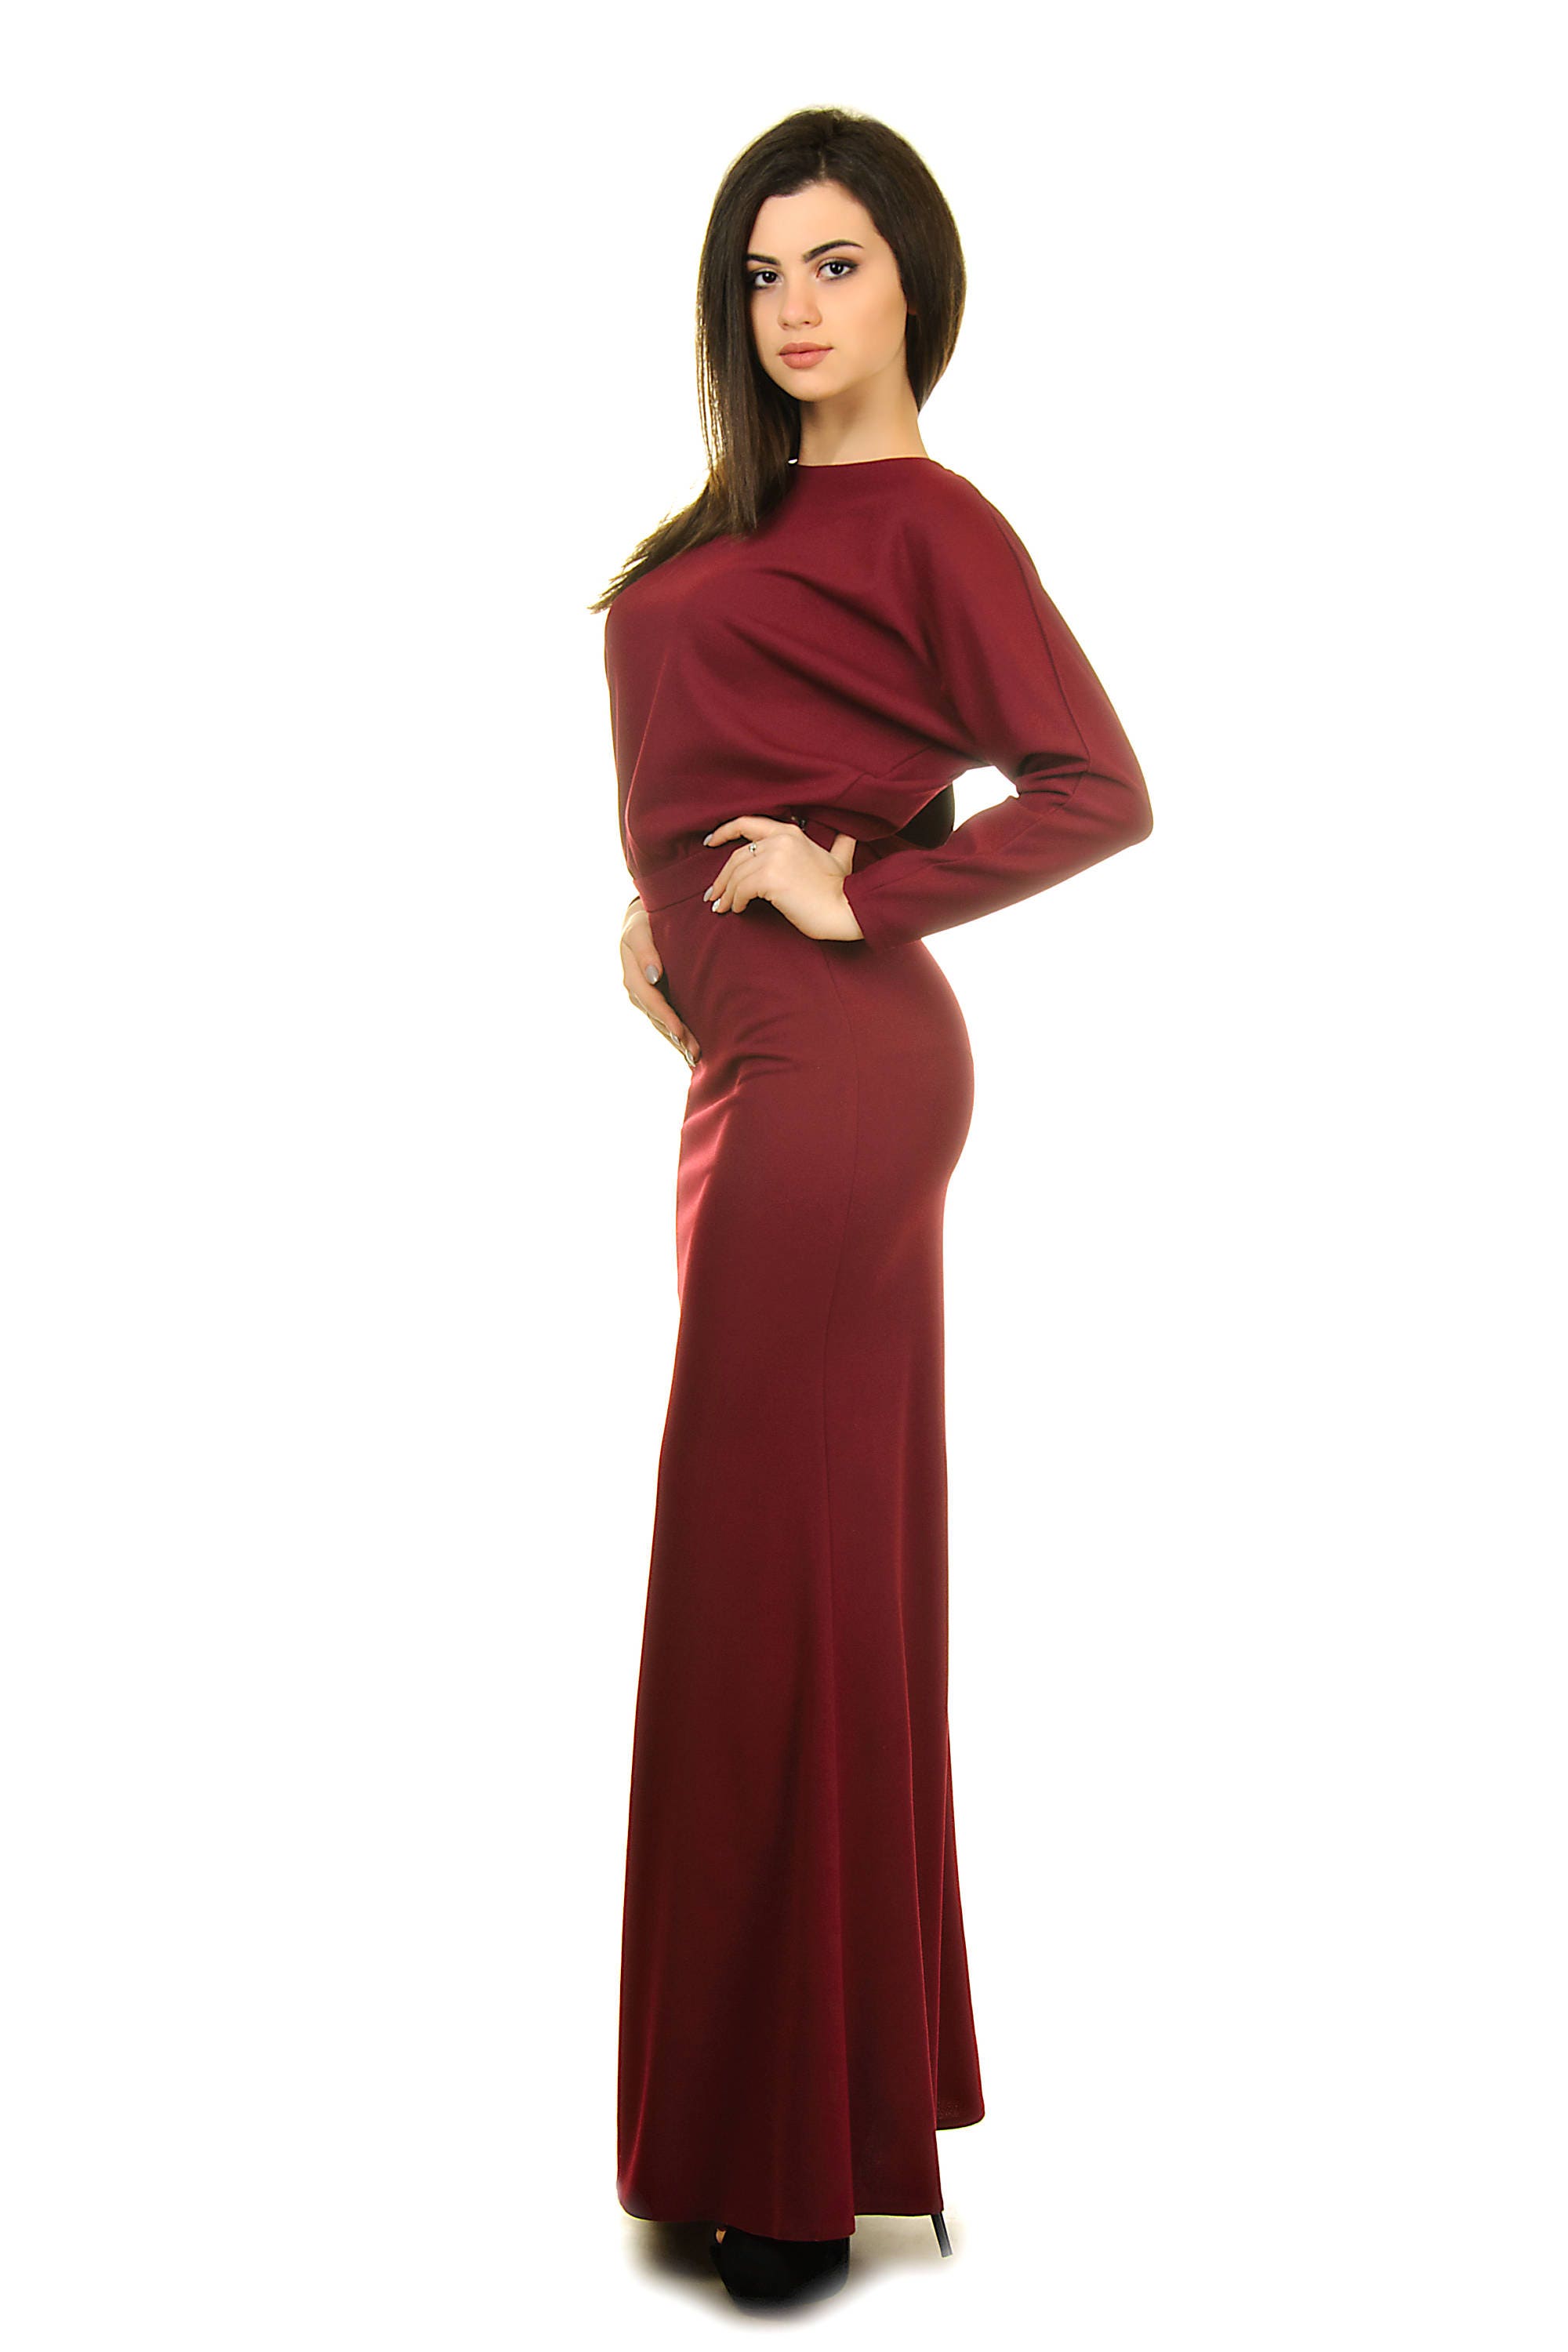 Burgundy long sleeve evening gown Maxi open back dress | Etsy